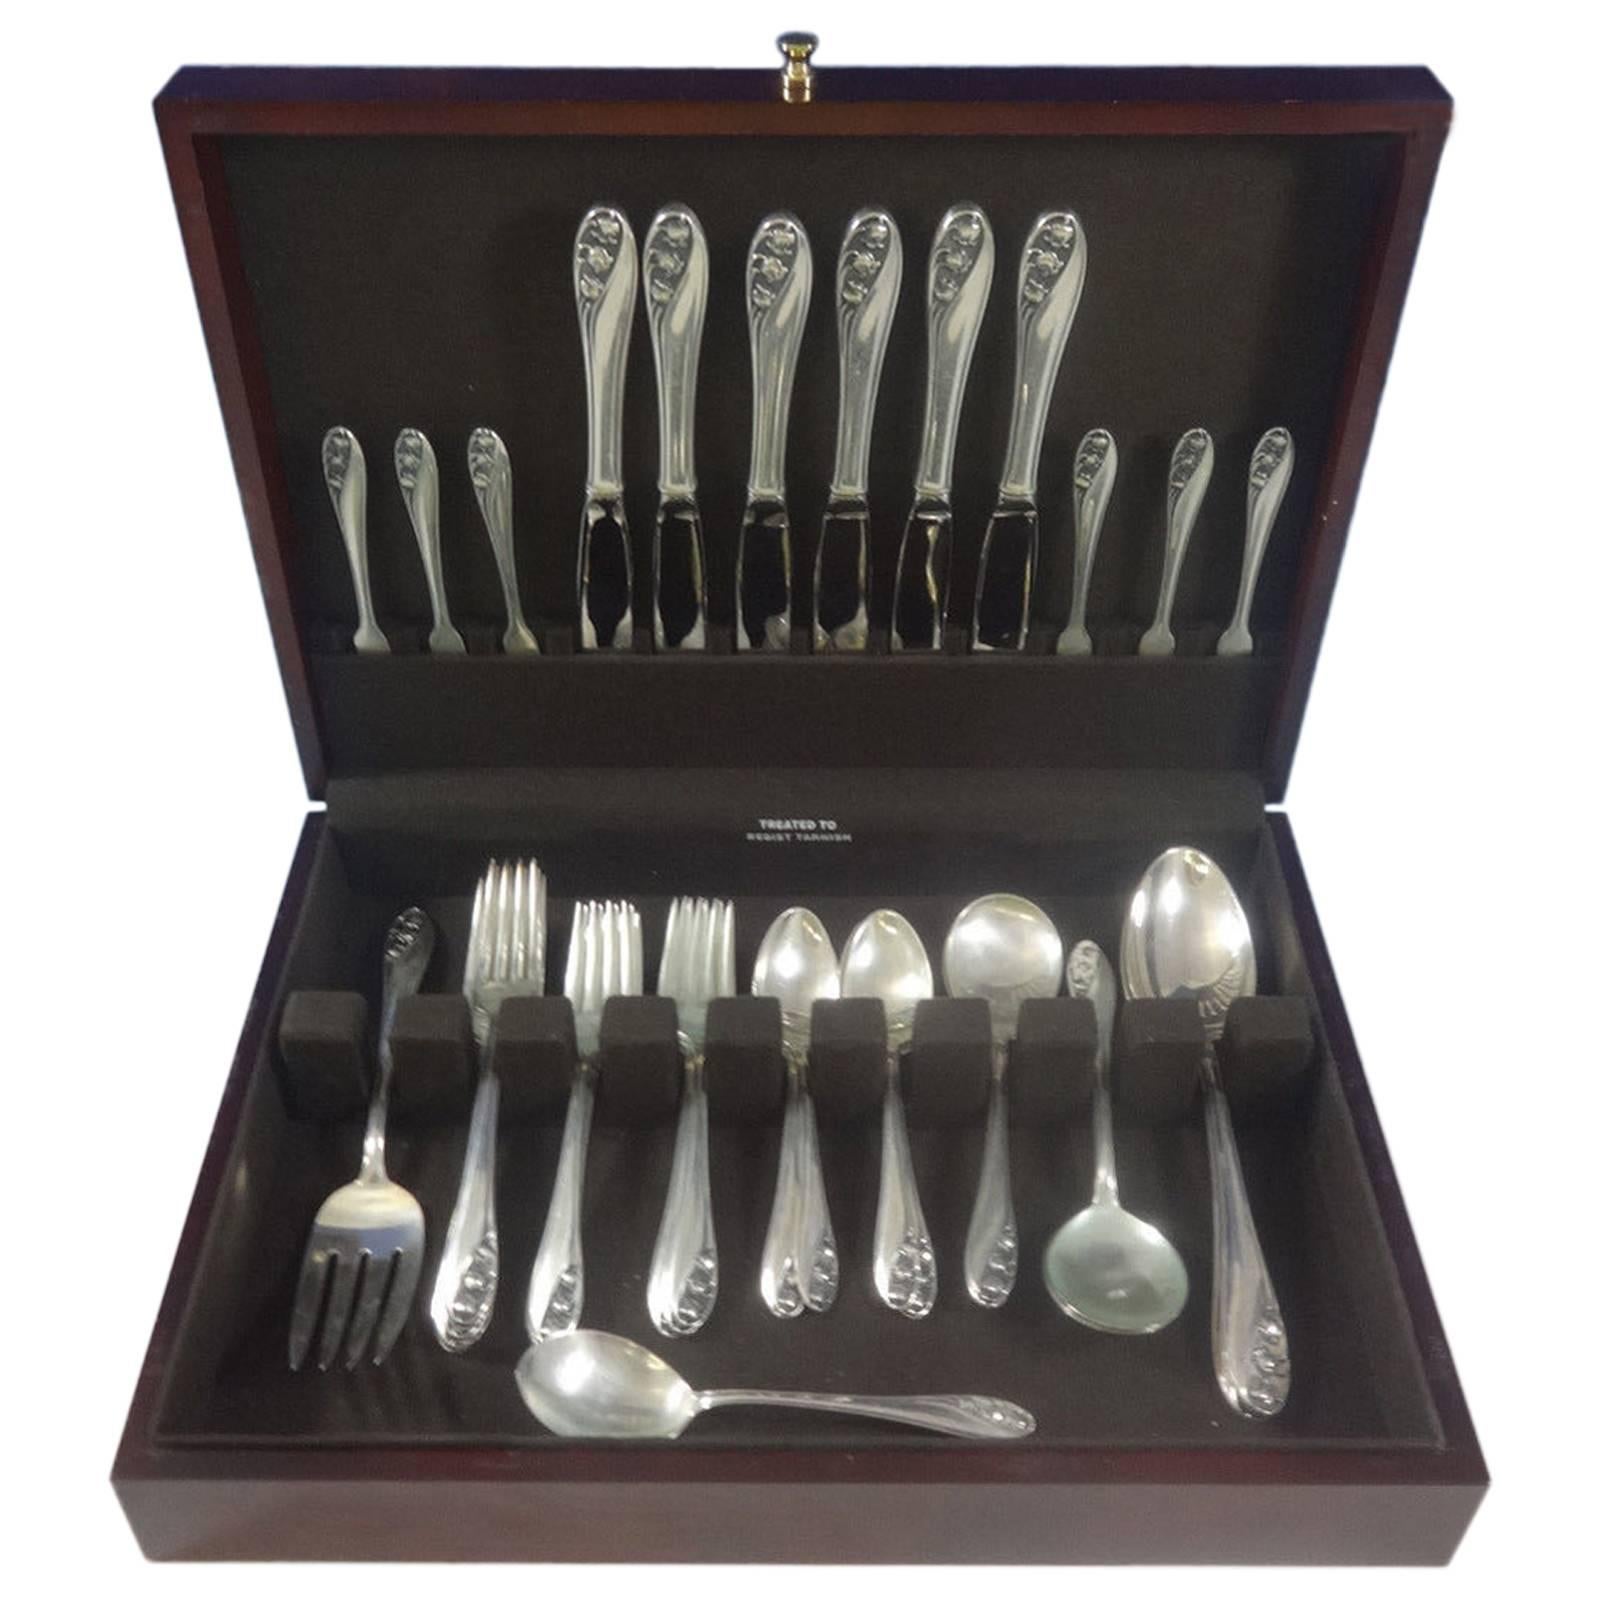 Beautiful Lily of the valley by Gorham sterling silver flatware set of 40 pieces. Great starter set! This set includes: 

Six knives, 9